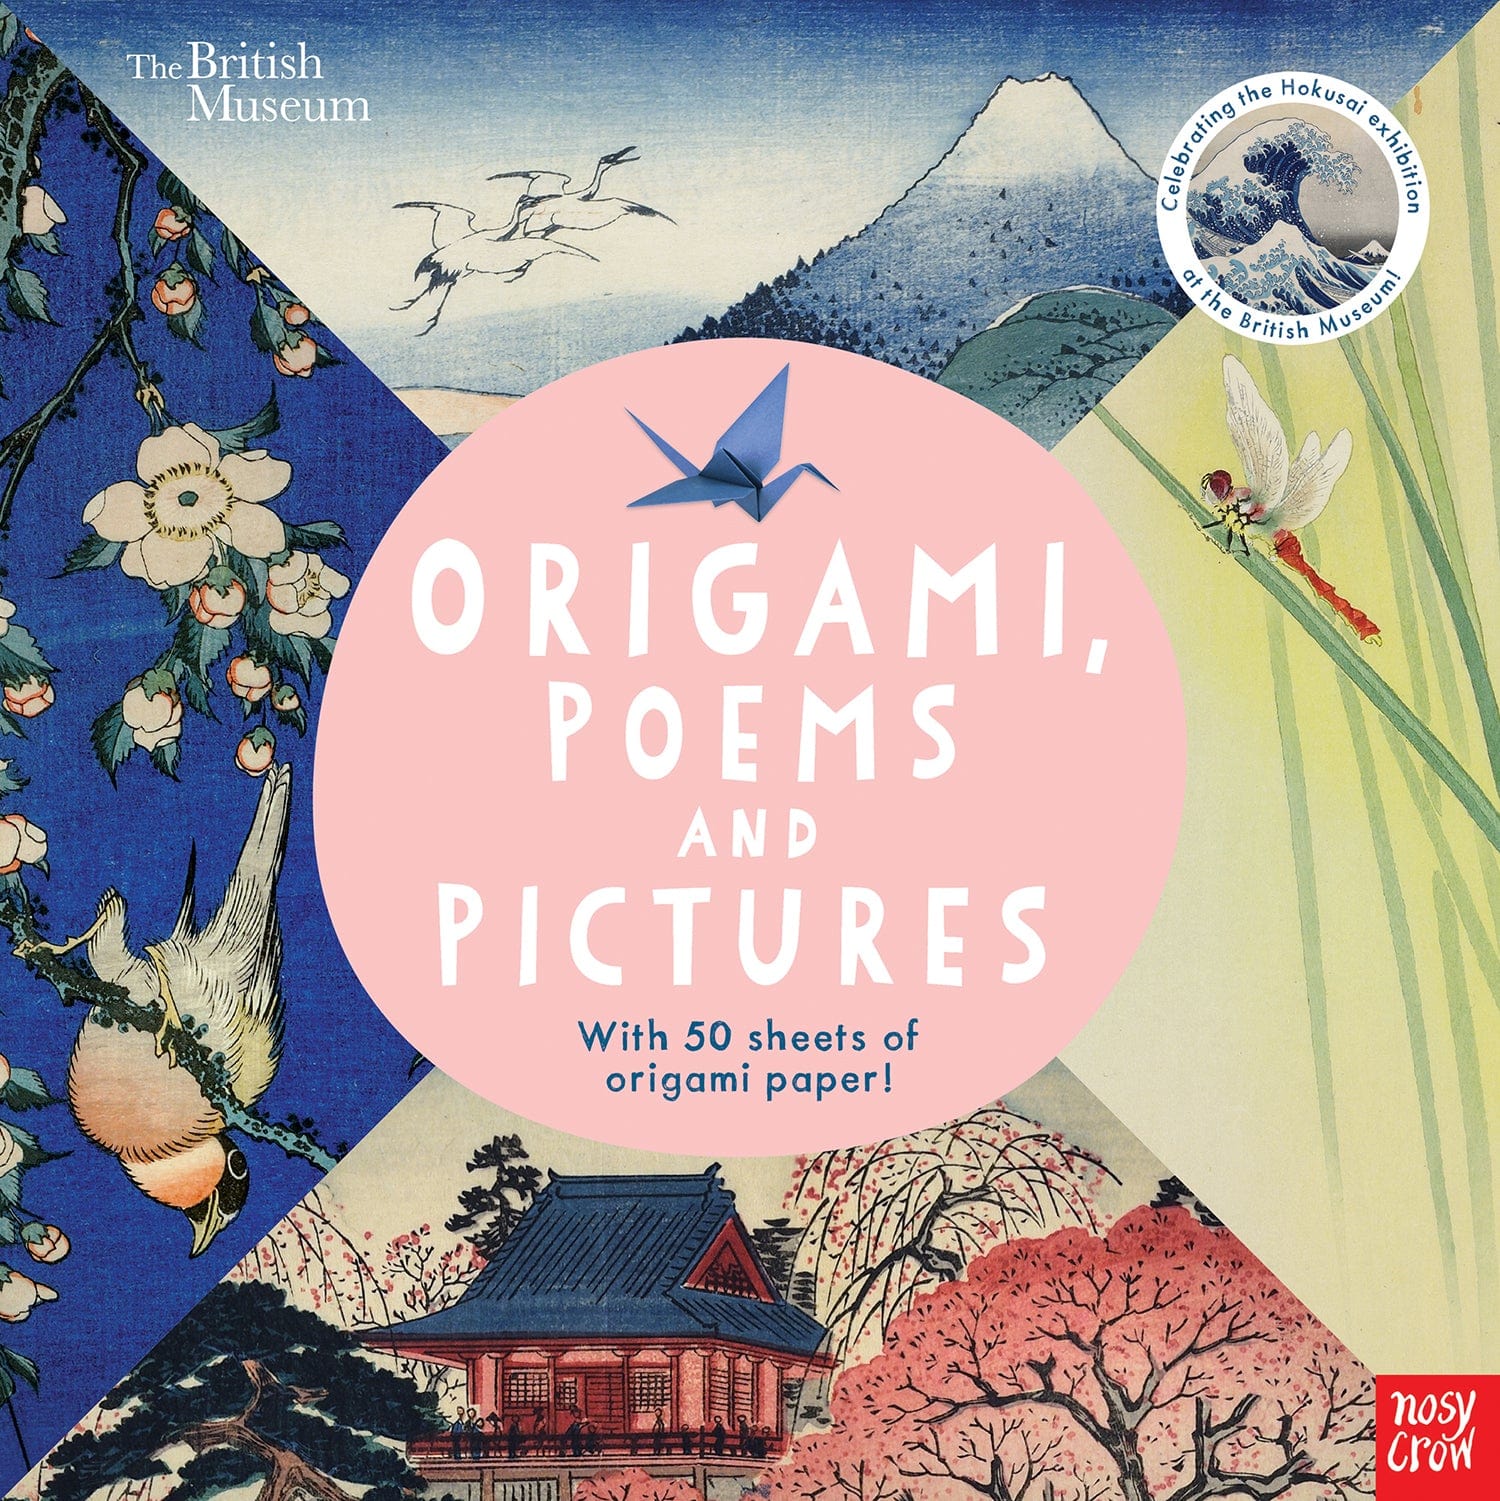 Nosy Crow British Museum: Origami, Poems and Pictures – Celebrating the Hokusai Exhibition at the British Museum By Nosy Crow Ltd